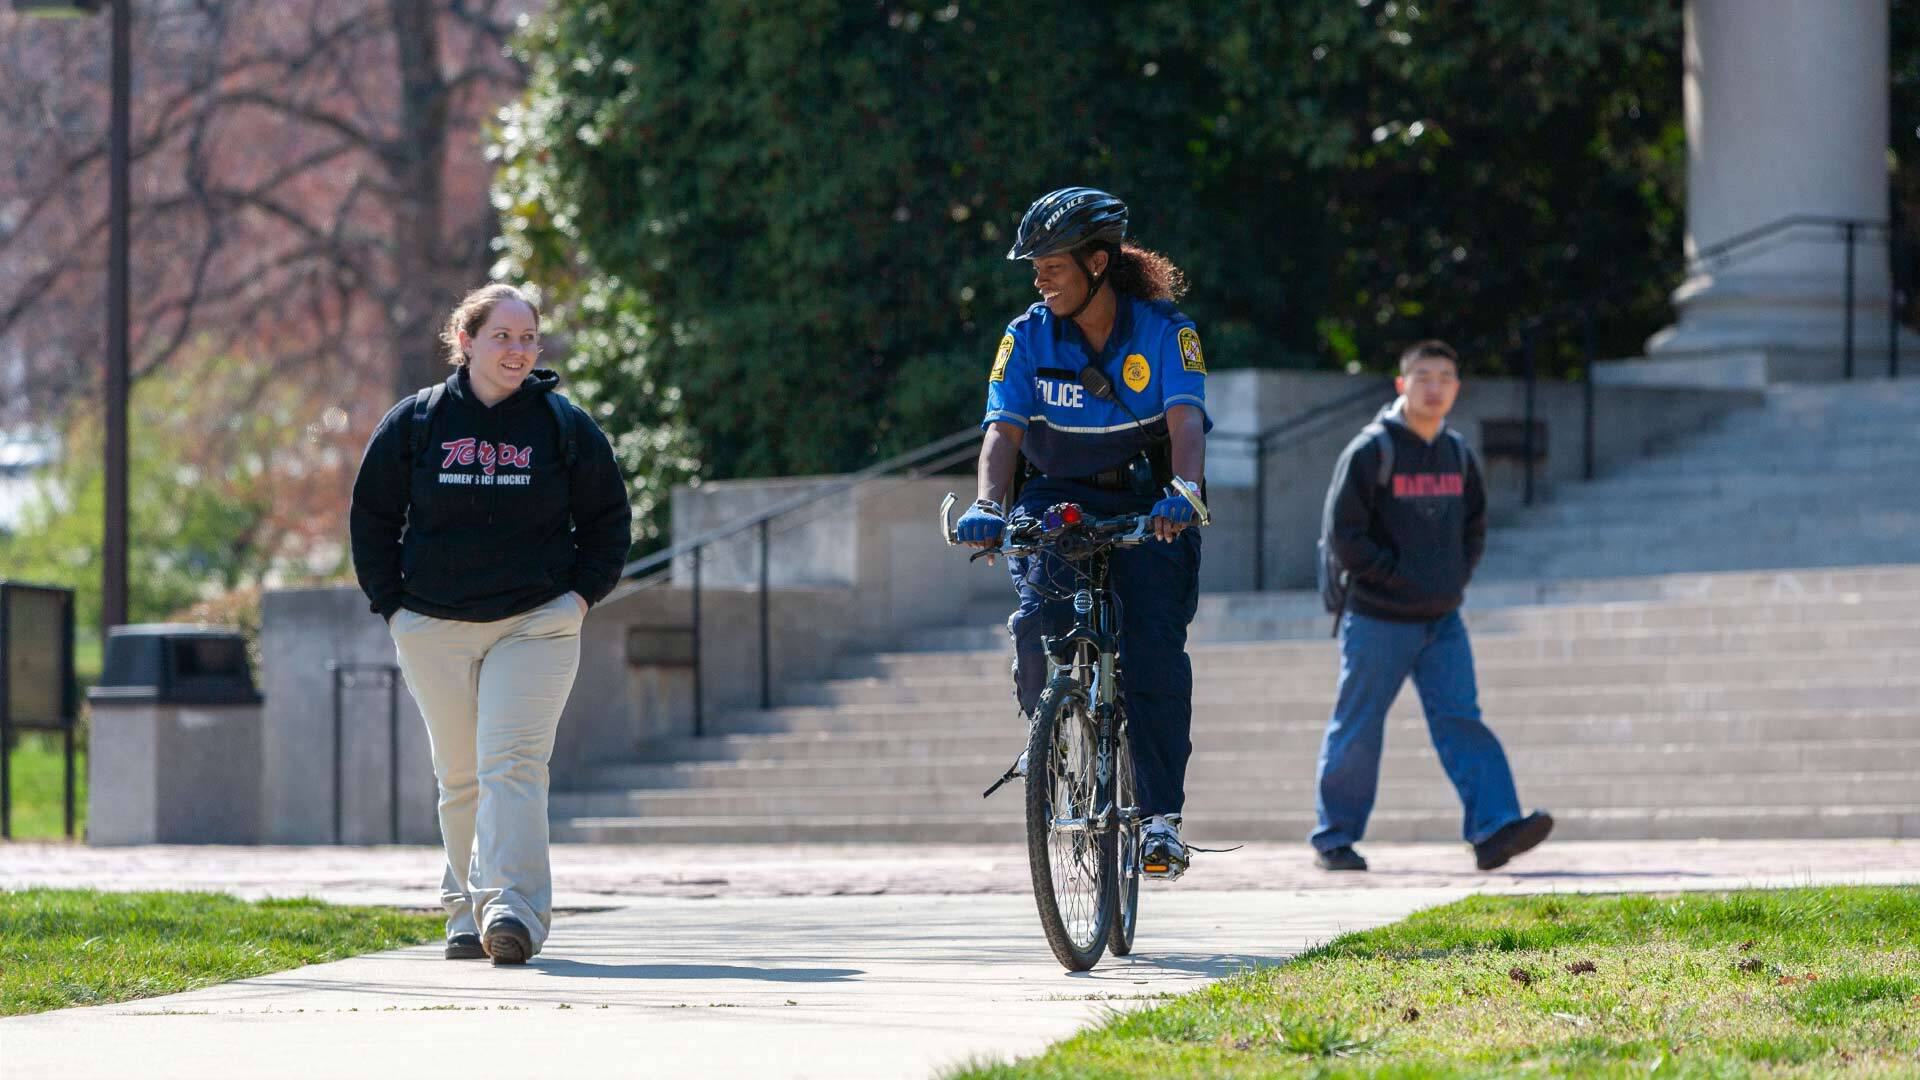 police officer rides bike past two students on campus